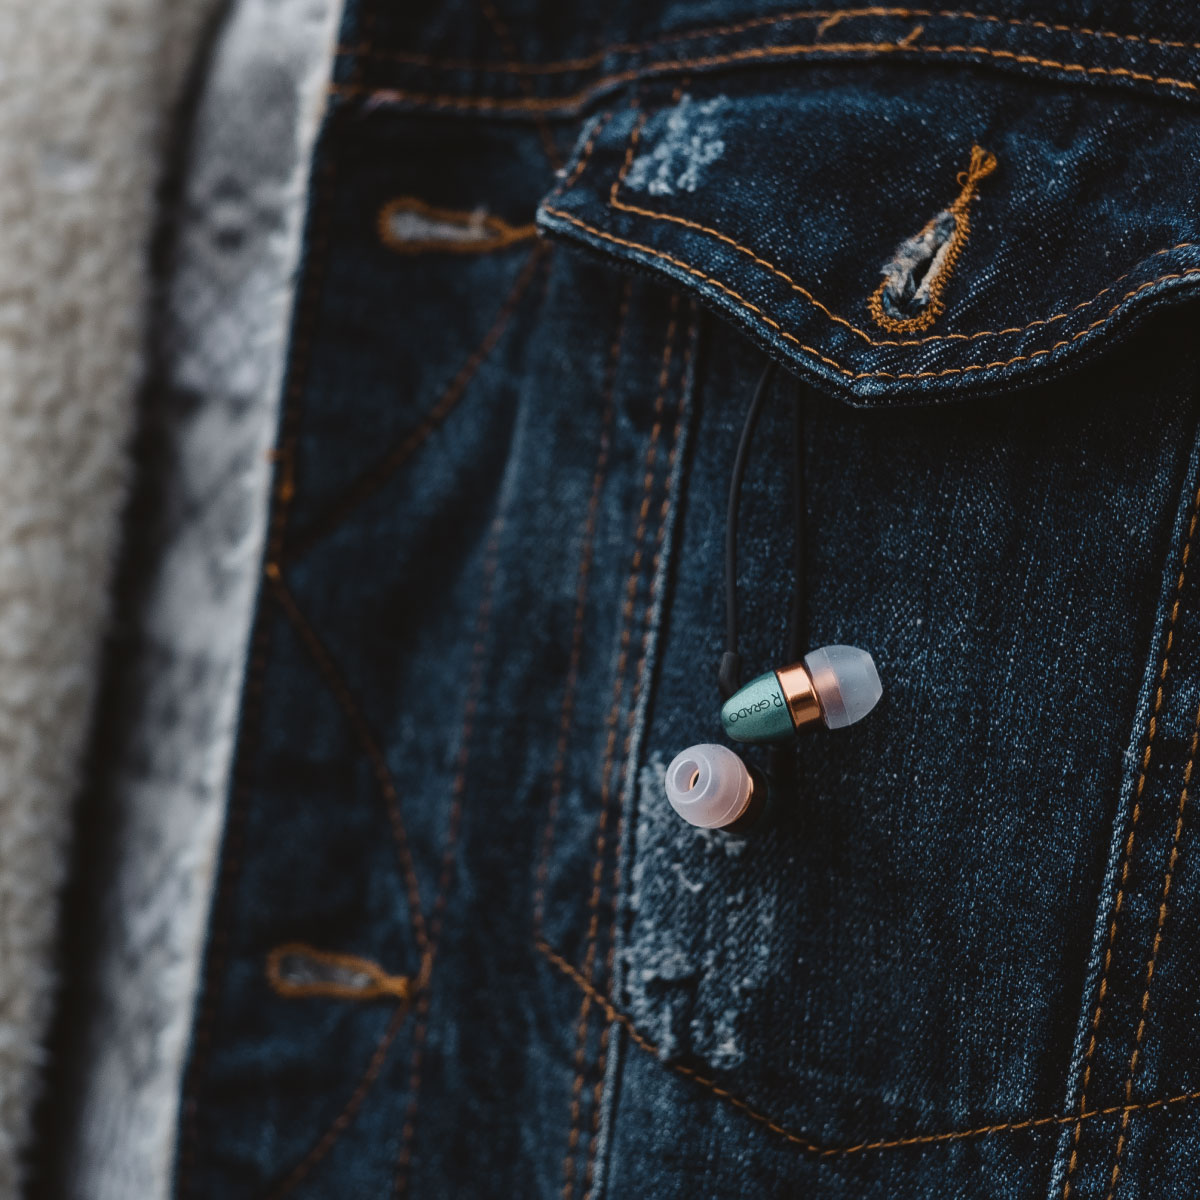 Photo of Grado gr10e headphones hanging from the button of a jean jacket pocket